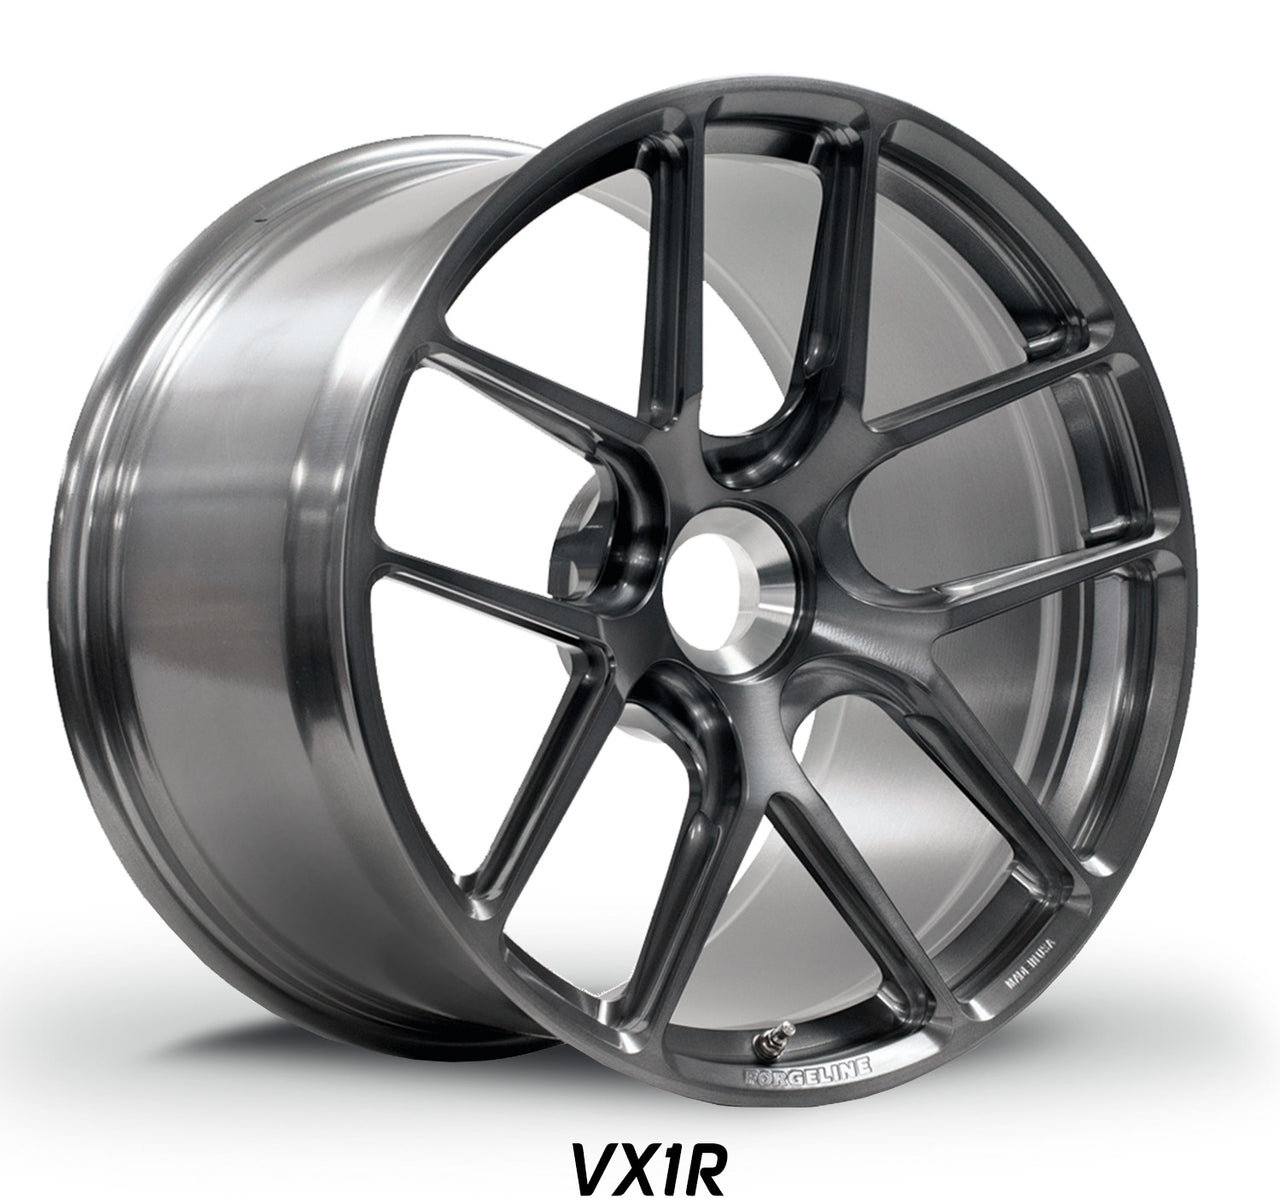 Transparent Smoke Forgeline VX1R for 991 Porsche 911 GT3 lightest weight wheels for HPDE and Time Trials